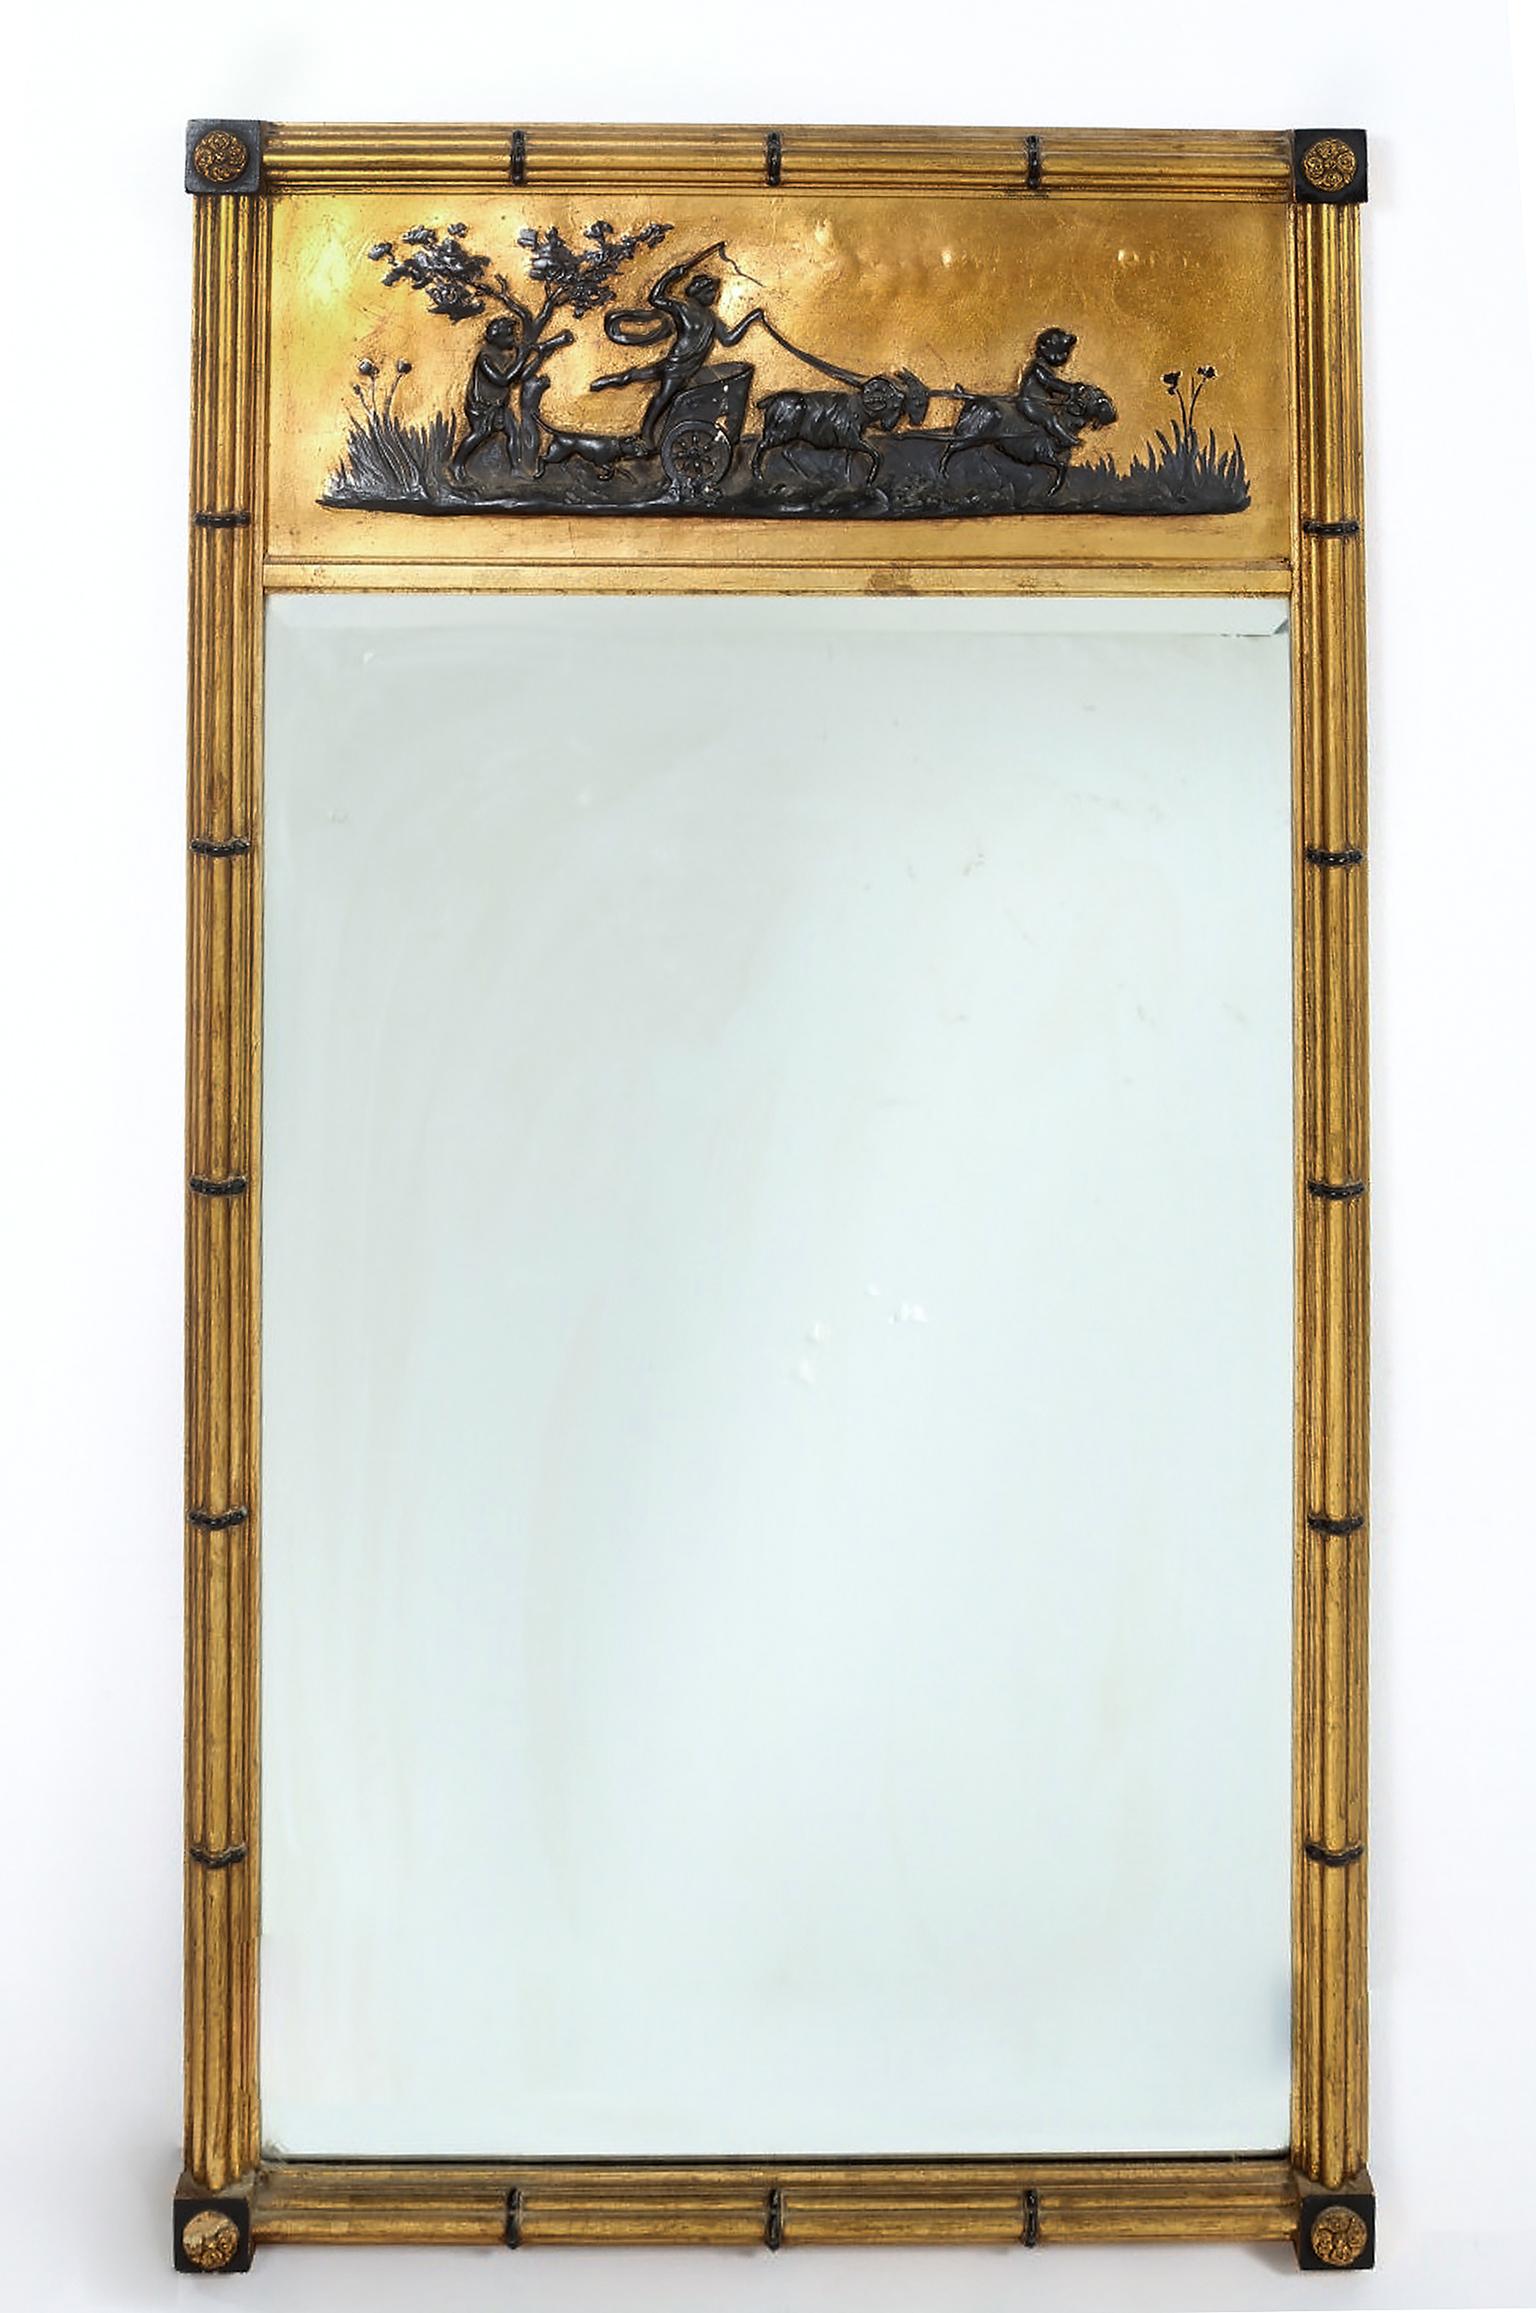 Giltwood Framed / Decorated Top Hanging Wall Mirror For Sale 3